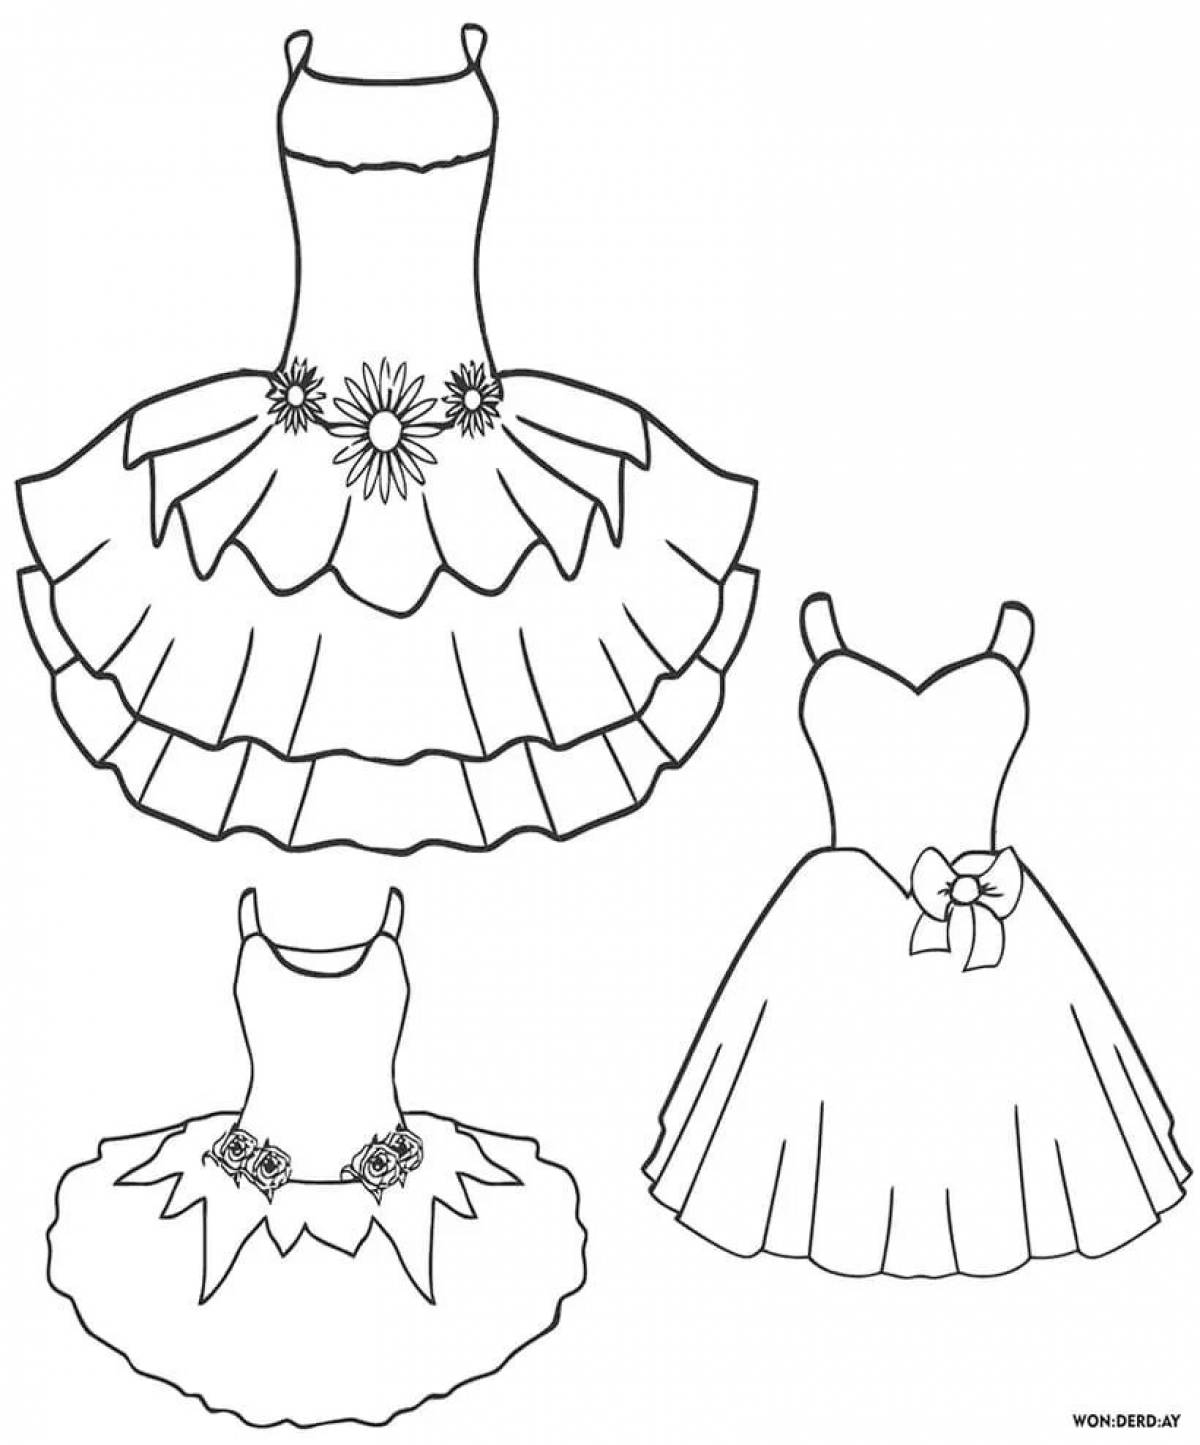 Gorgeous ball gown coloring book